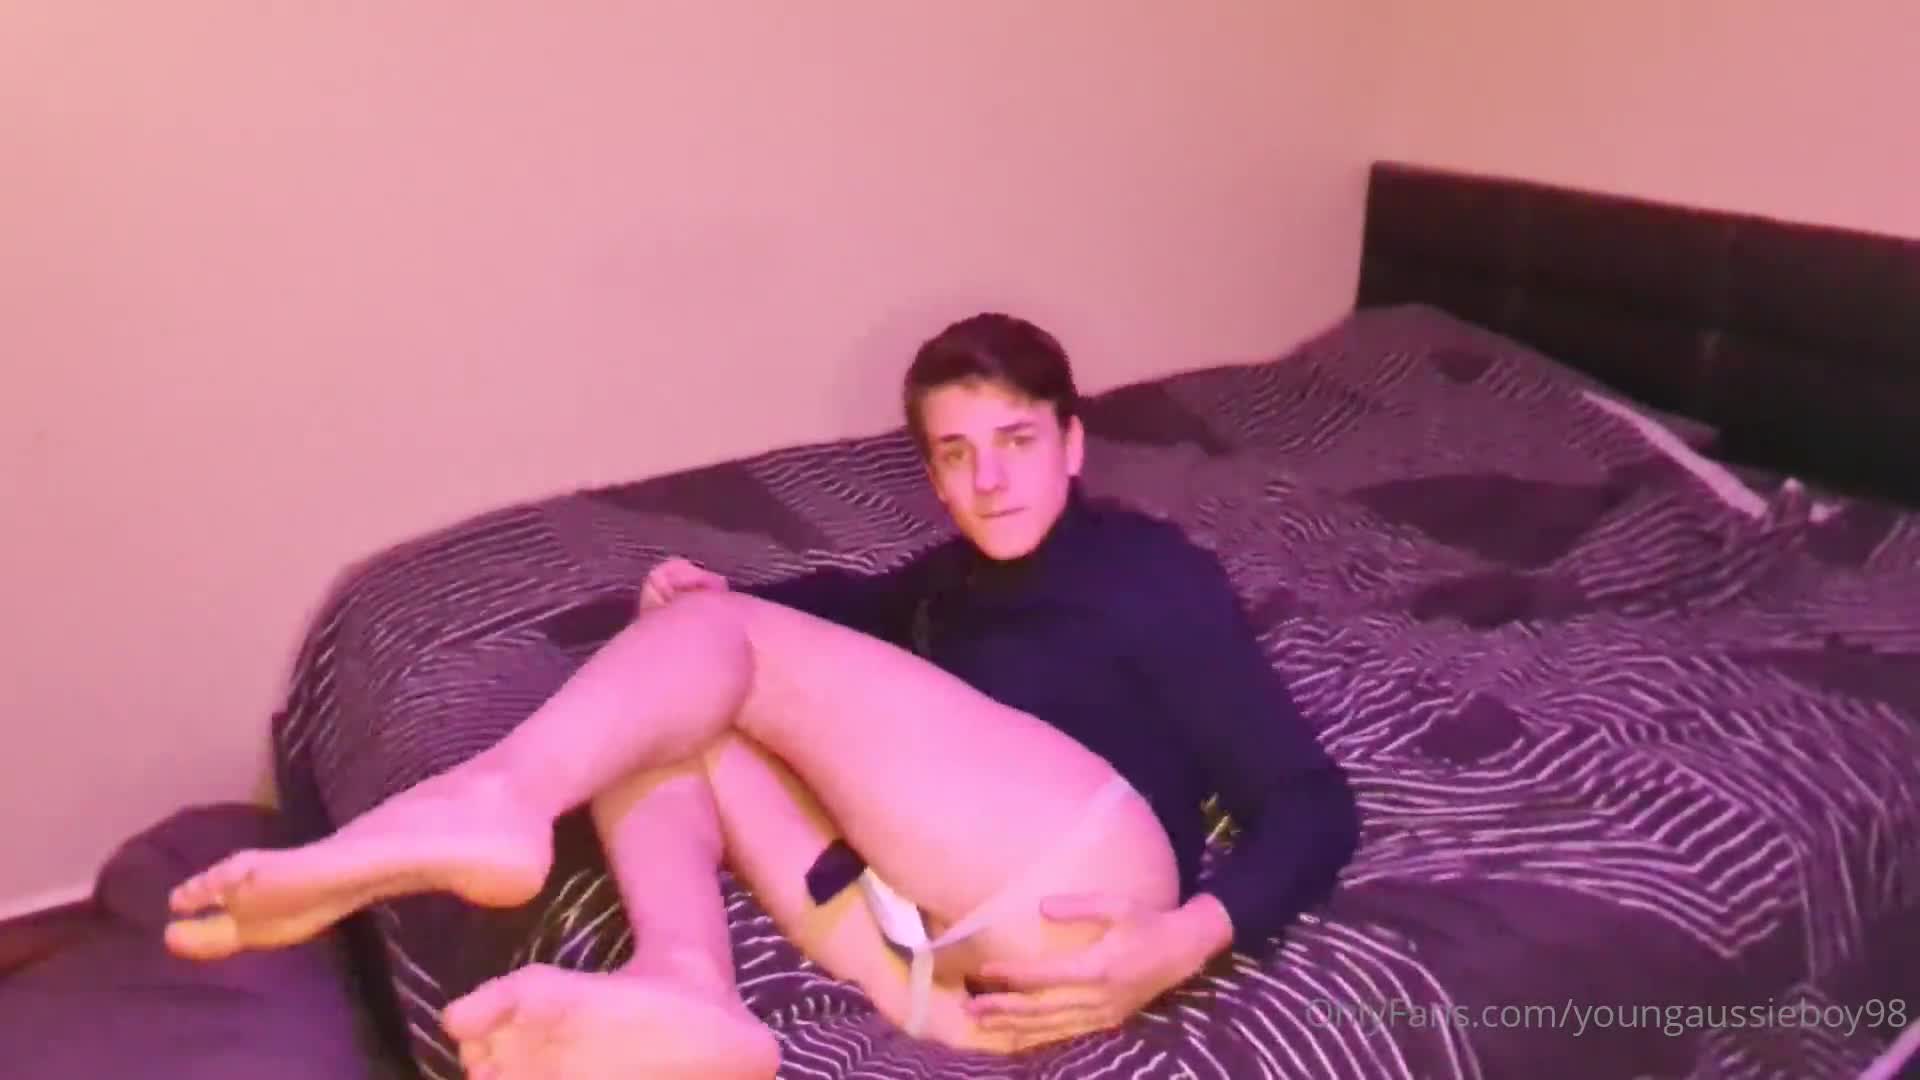 dapper twink connorp showing off his gorgeous puss